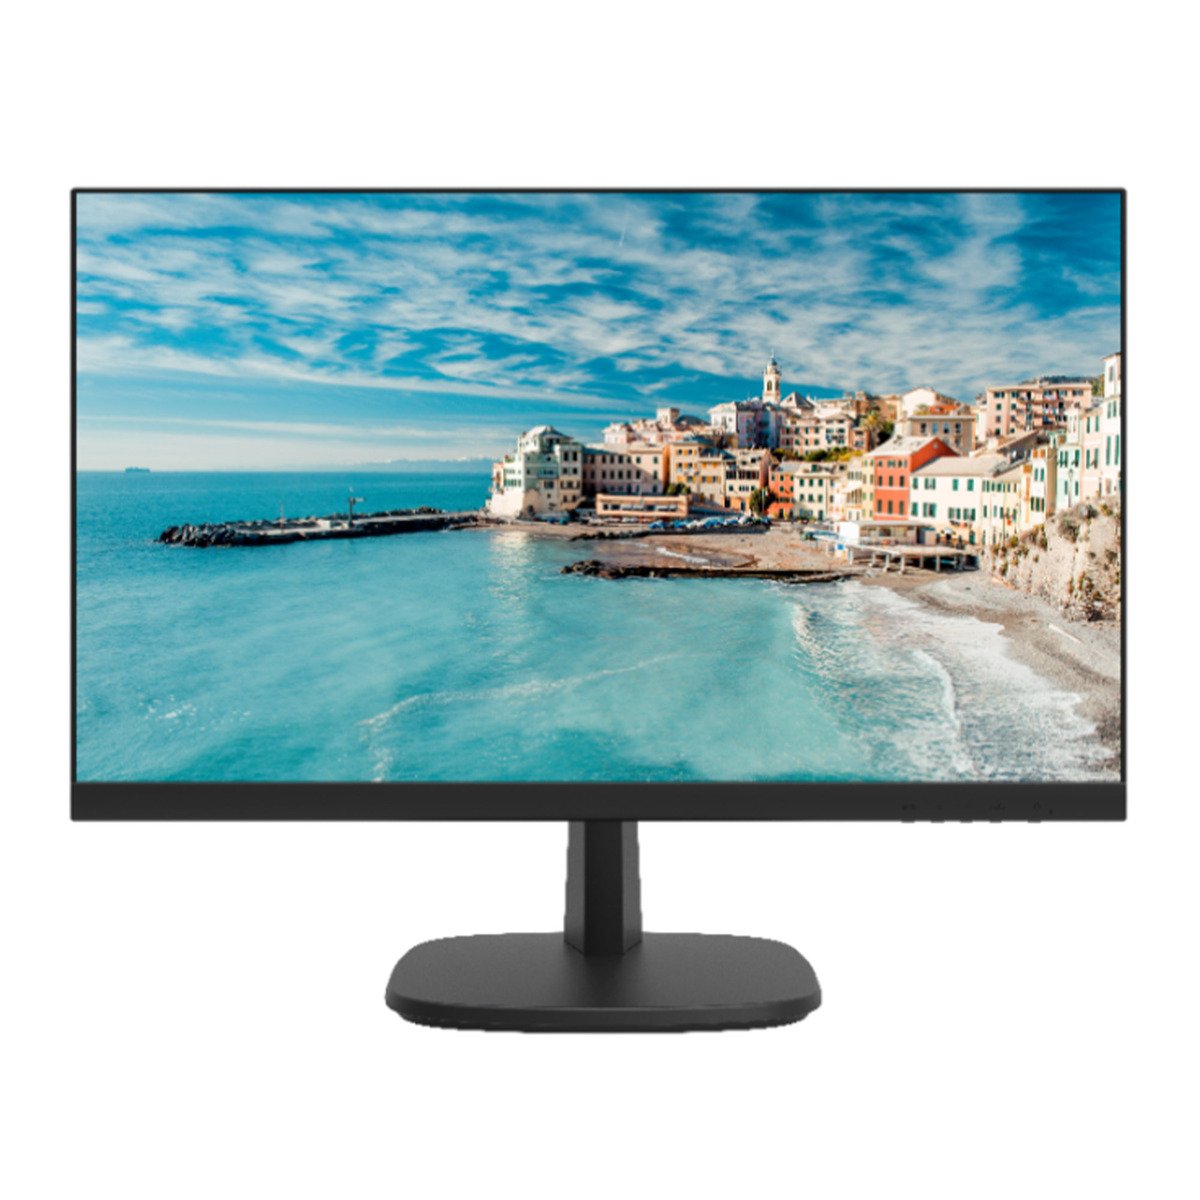 Hikvision FHD Monitor D5024FN 23.8 inch